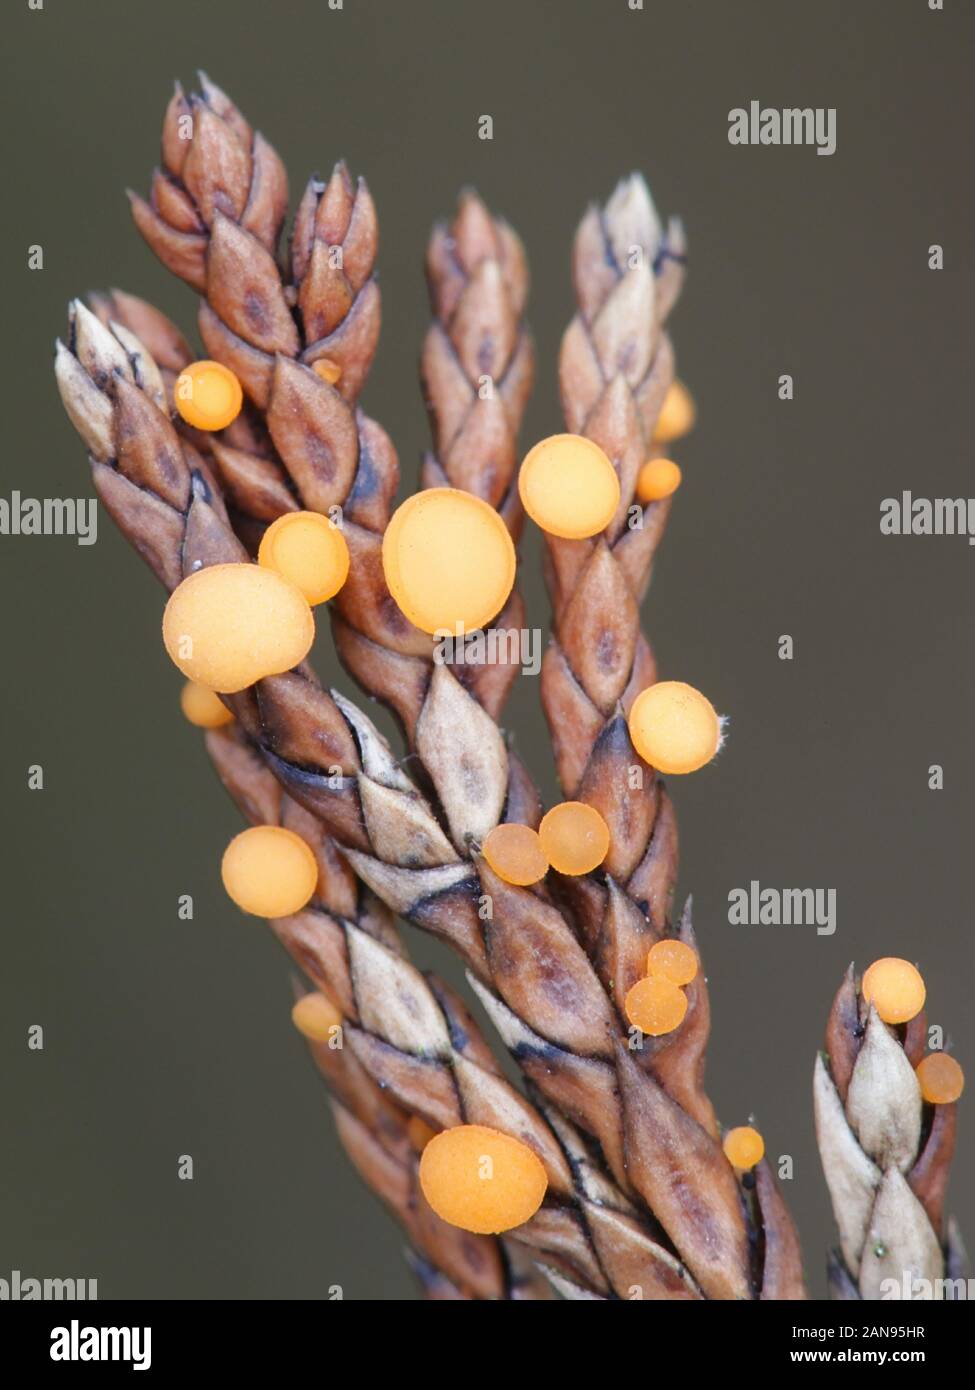 Pithya cupressina, known as juniper disco fungus, wild mushrooms from Finland Stock Photo